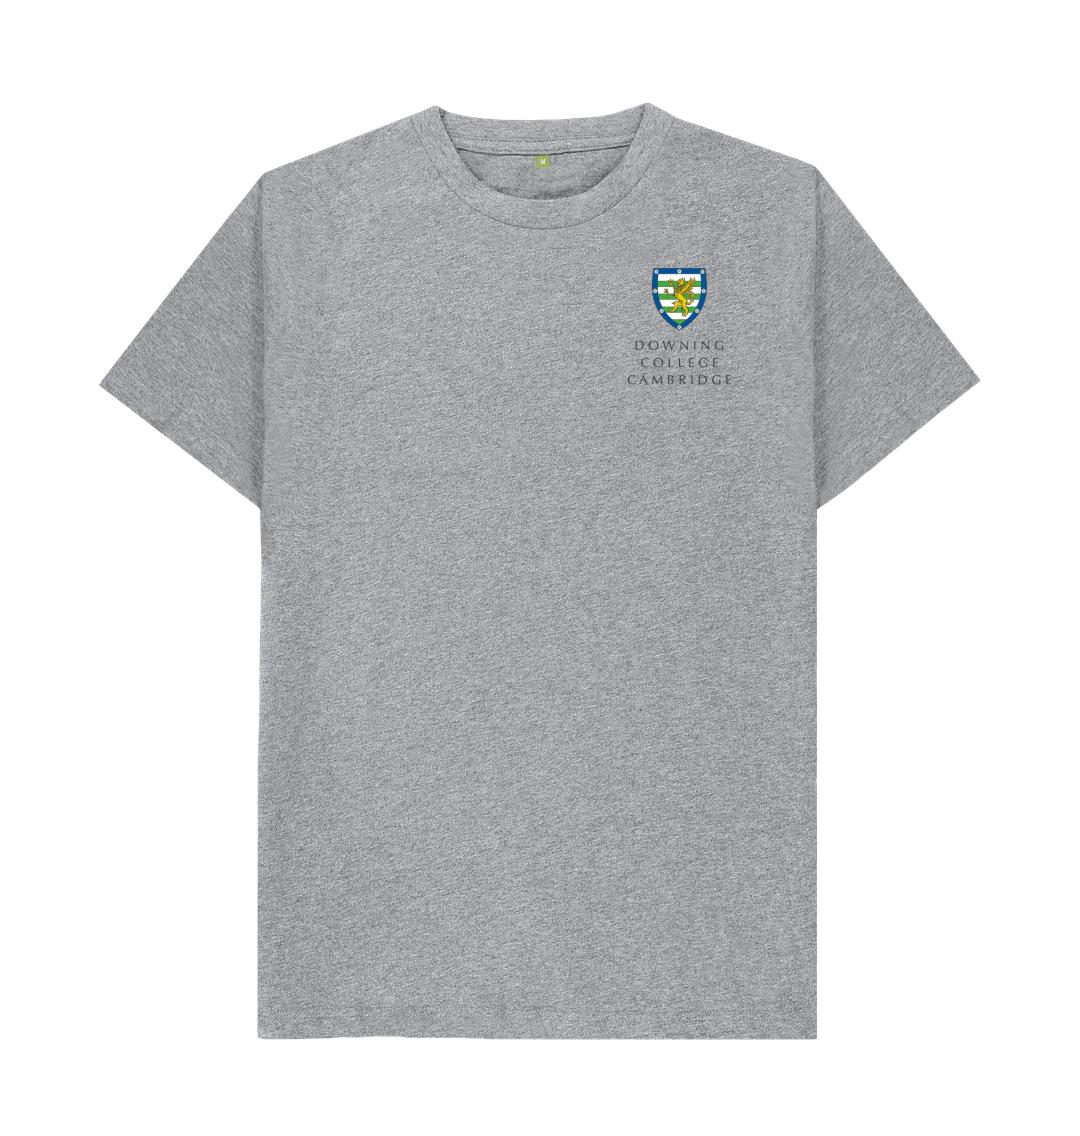 Athletic Grey Downing College Crew neck tee - light colours